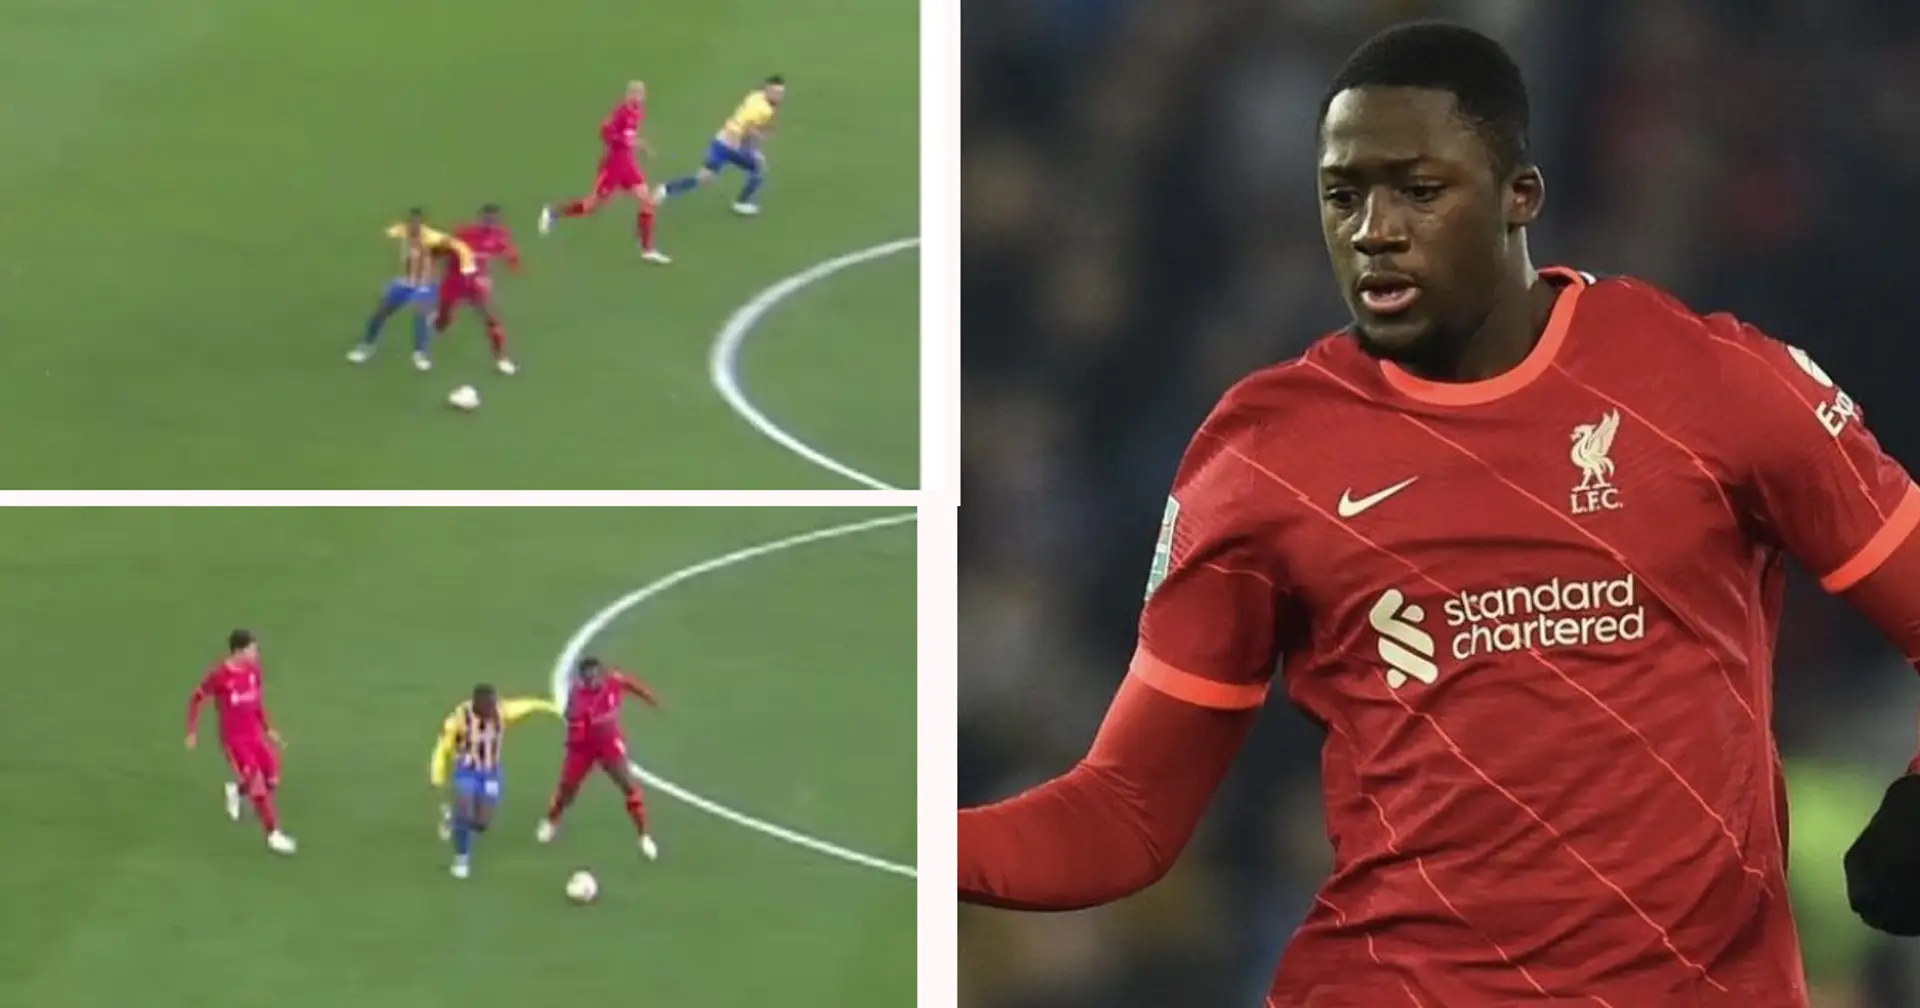 One episode from Liverpool's 4-1 win highlights Konate's worth